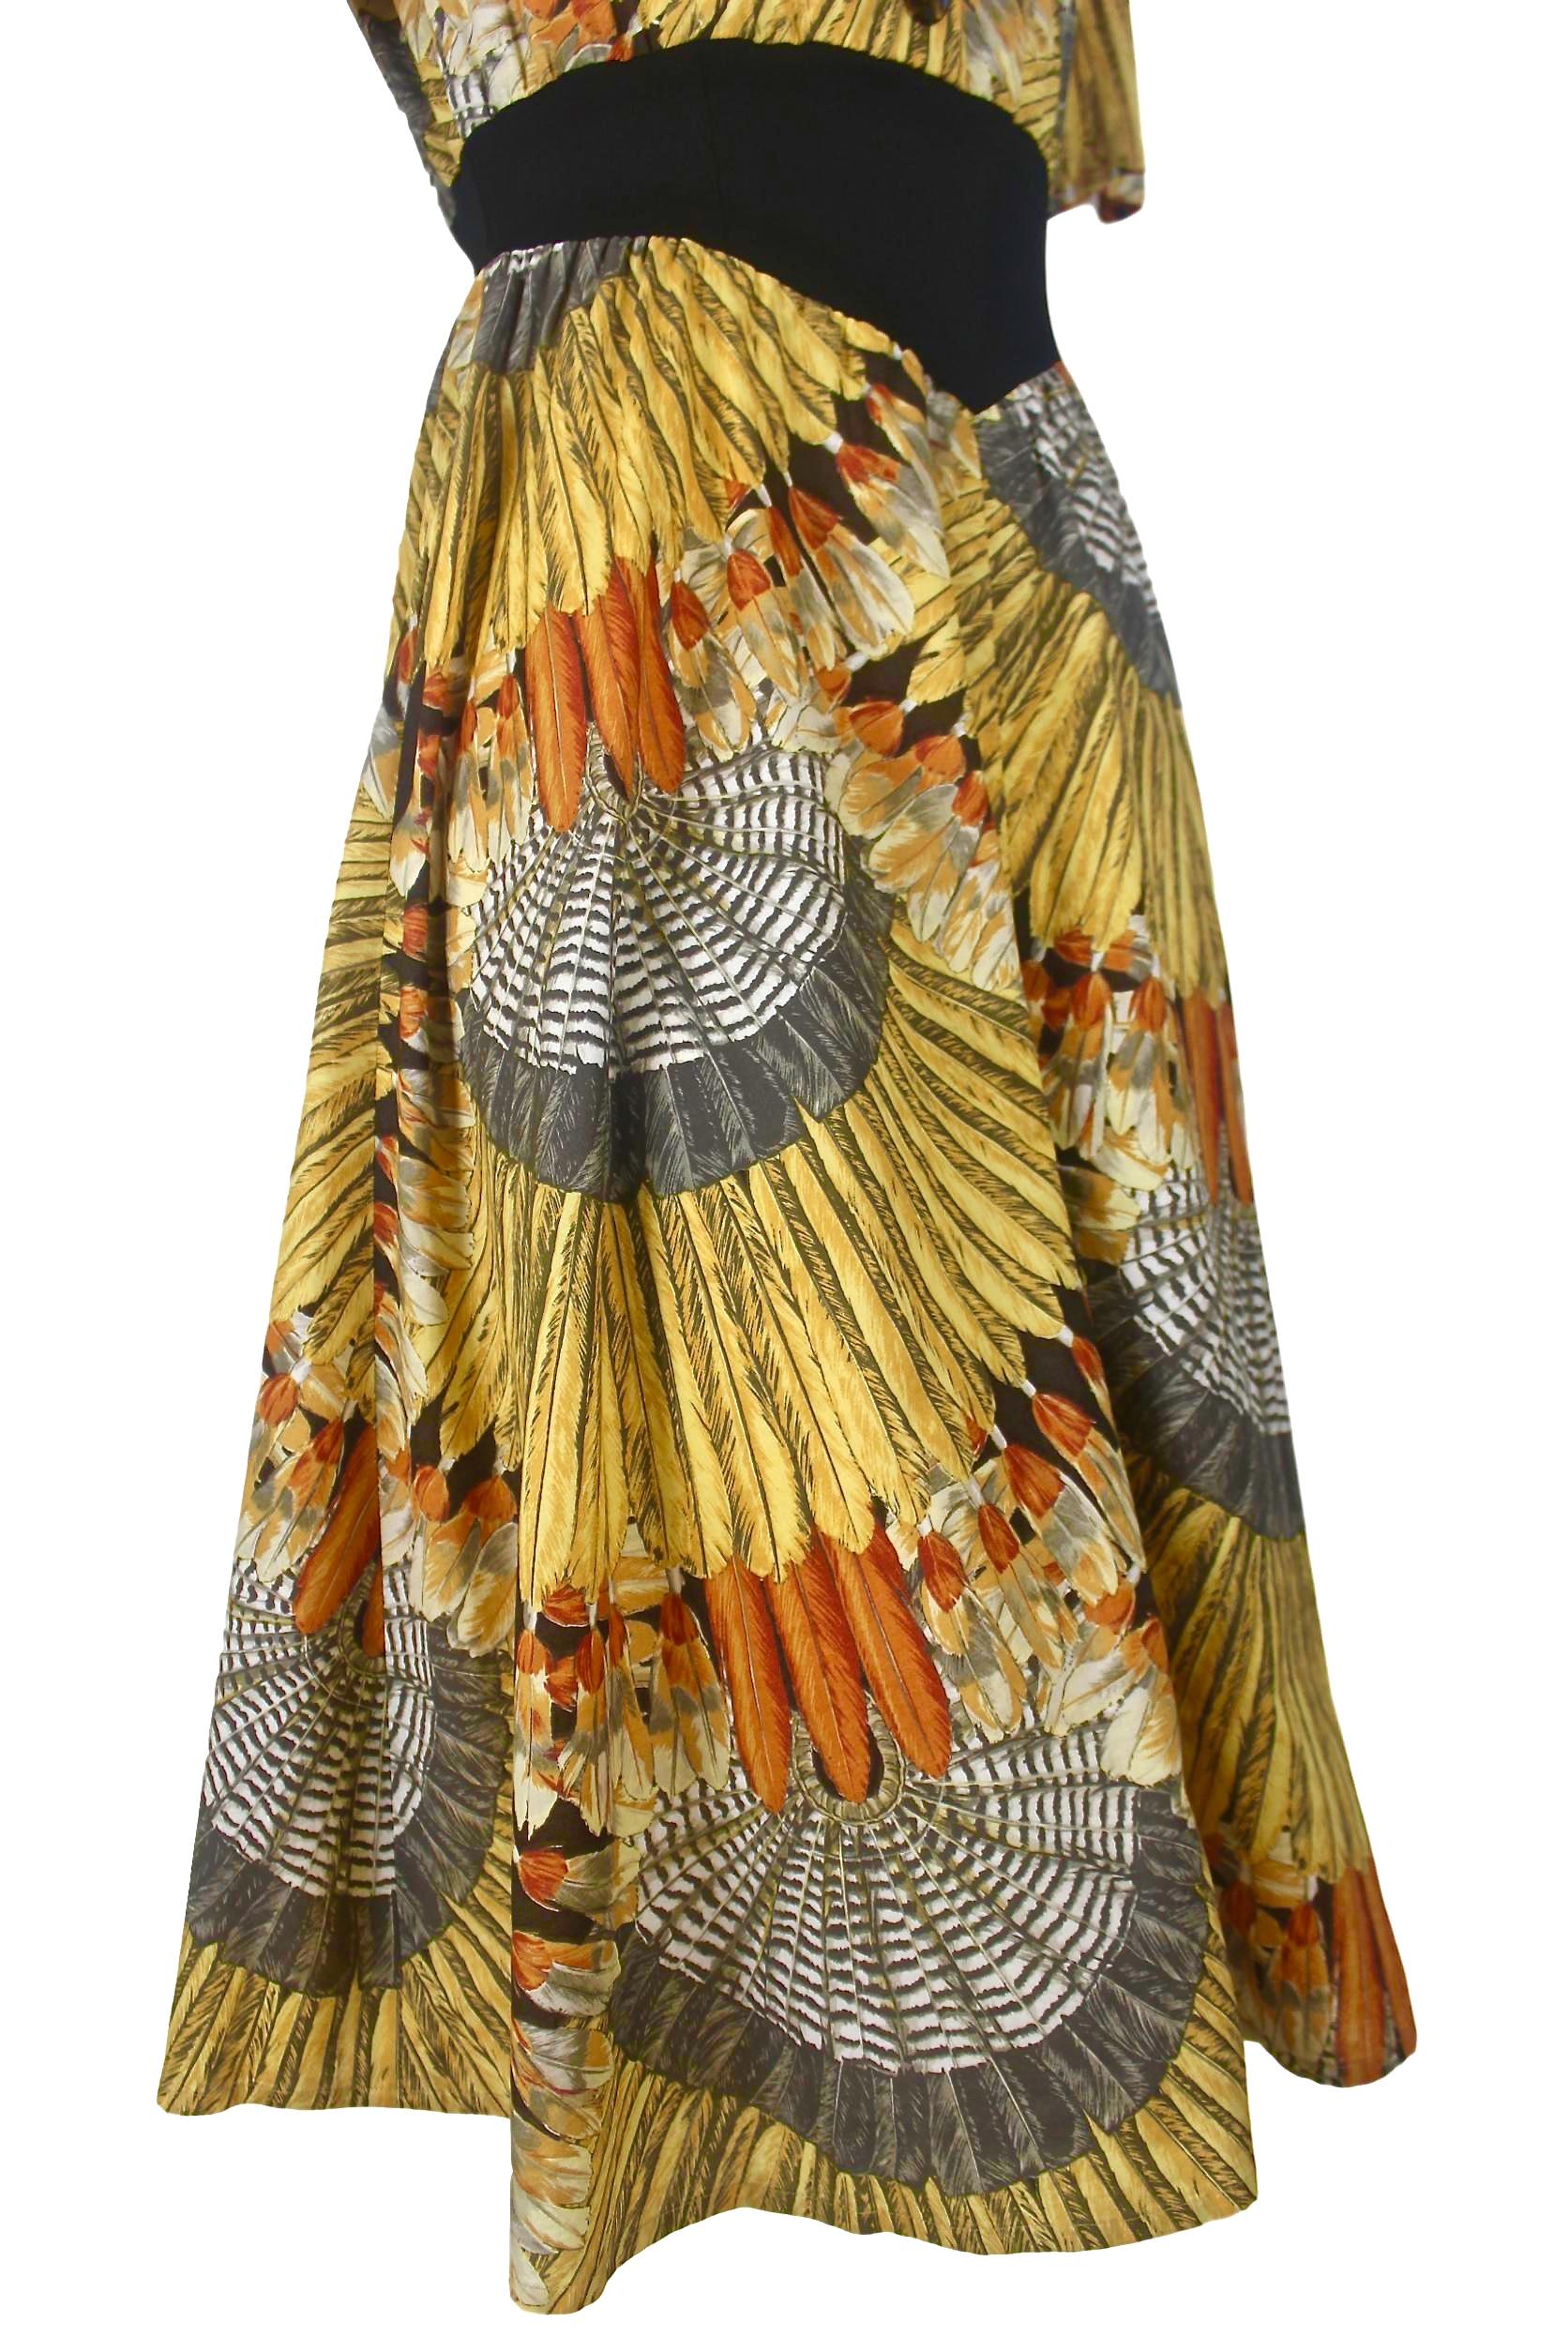 Sorelle Fontana Feather Print Dress In Good Condition For Sale In Bath, GB